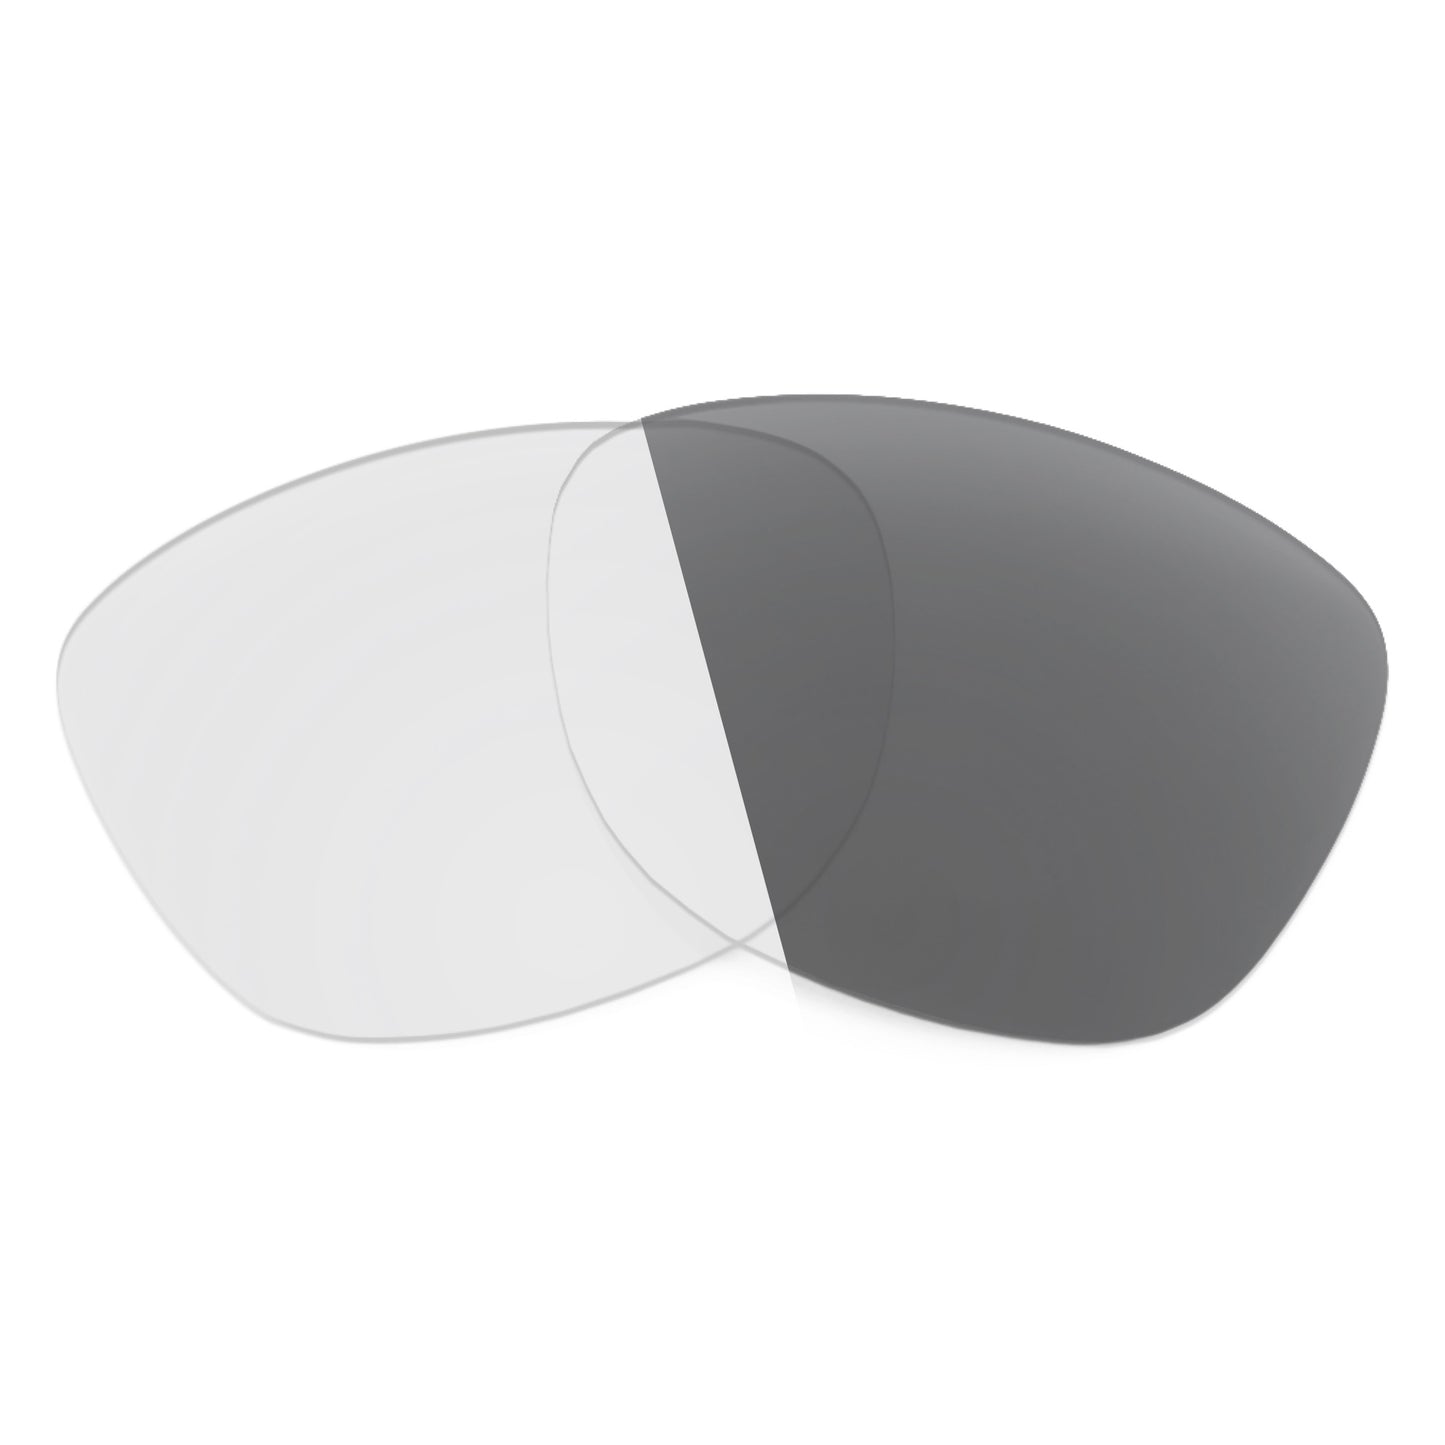 Revant replacement lenses for Ray-Ban RB4141 51mm Non-Polarized Adapt Gray Photochromic